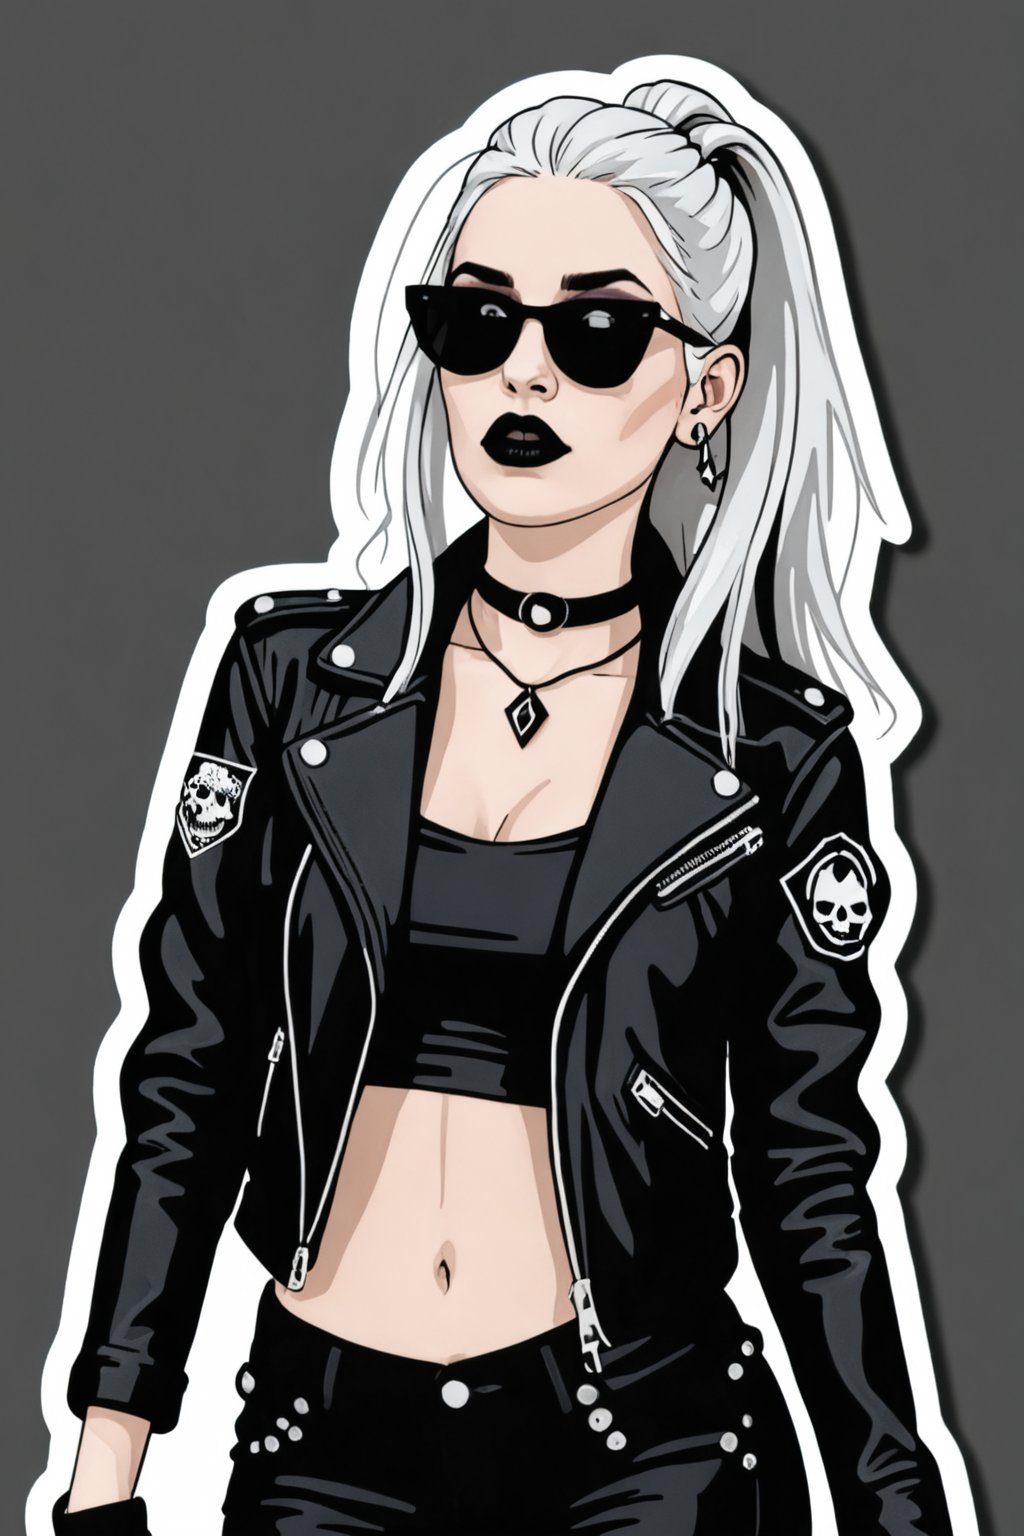 sticker_layout, bust, goth girl, long white hair, black lipstick, sunglasses, hoop earing, black leather jacket, spiked jacket,